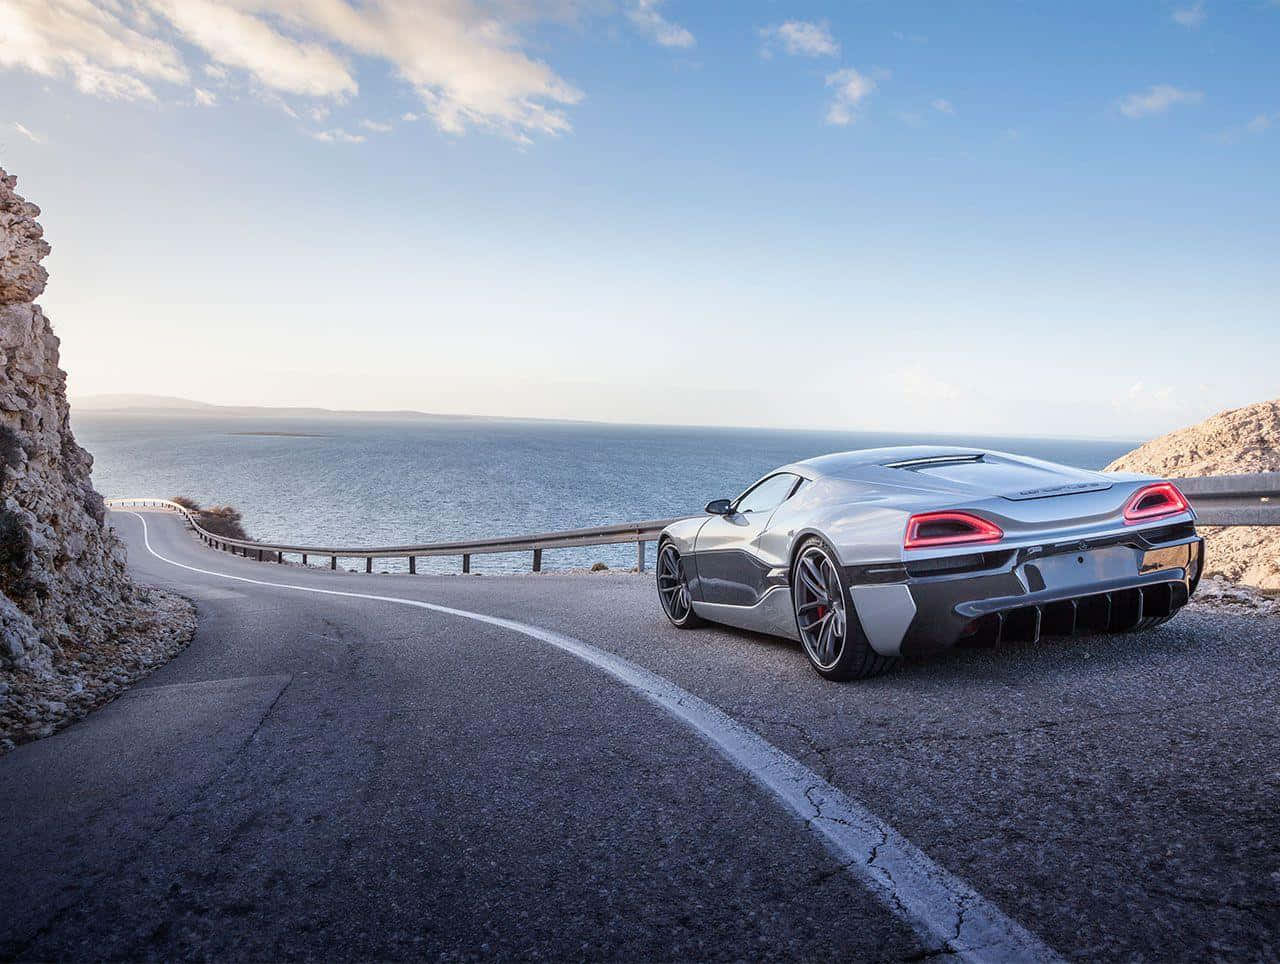 The Sleek And Powerful Rimac Concept One Electric Hypercar. Wallpaper